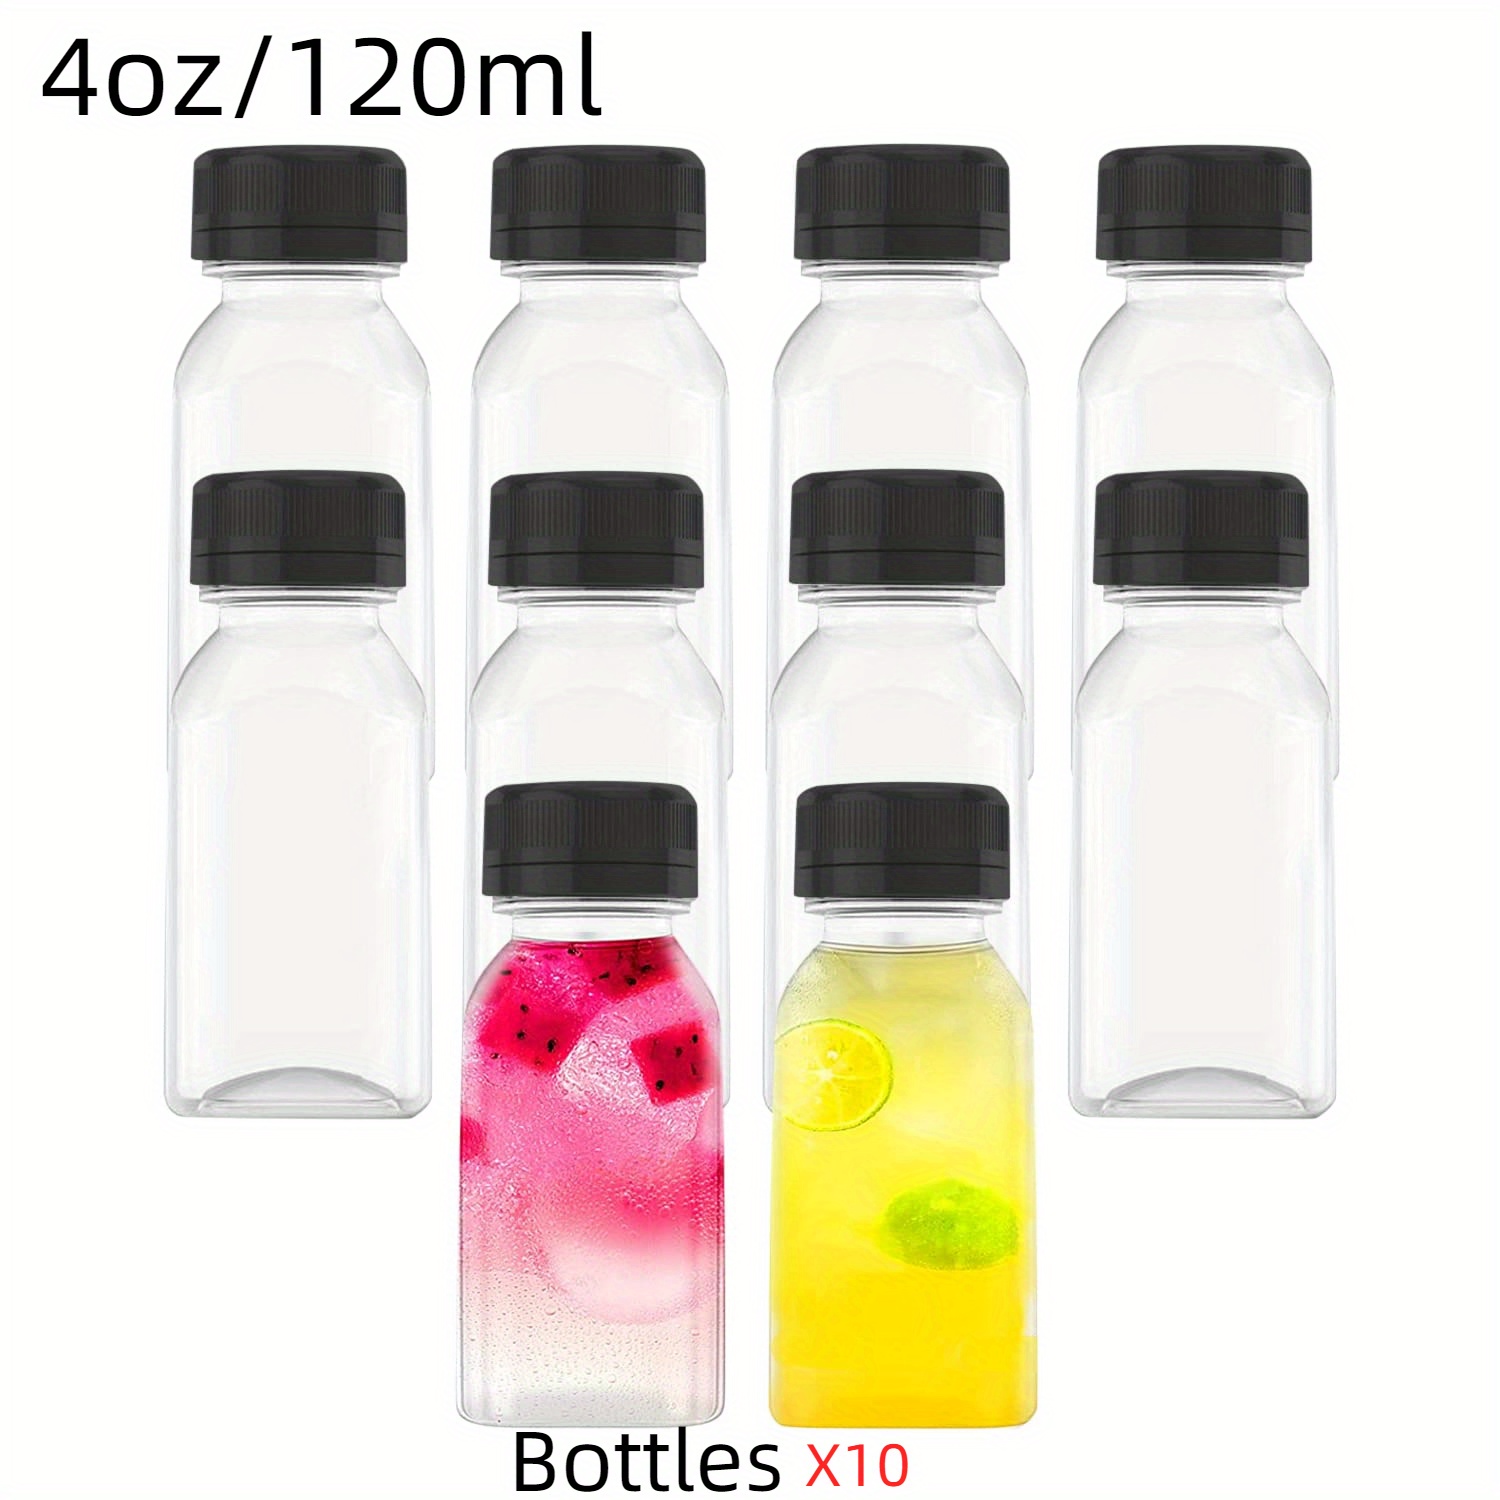 Ilyapa Glass Juice Shot Bottles Pack of 8 - 4oz On The Go Beverage Storage  Container with White Cap, Reusable, Leak Proof